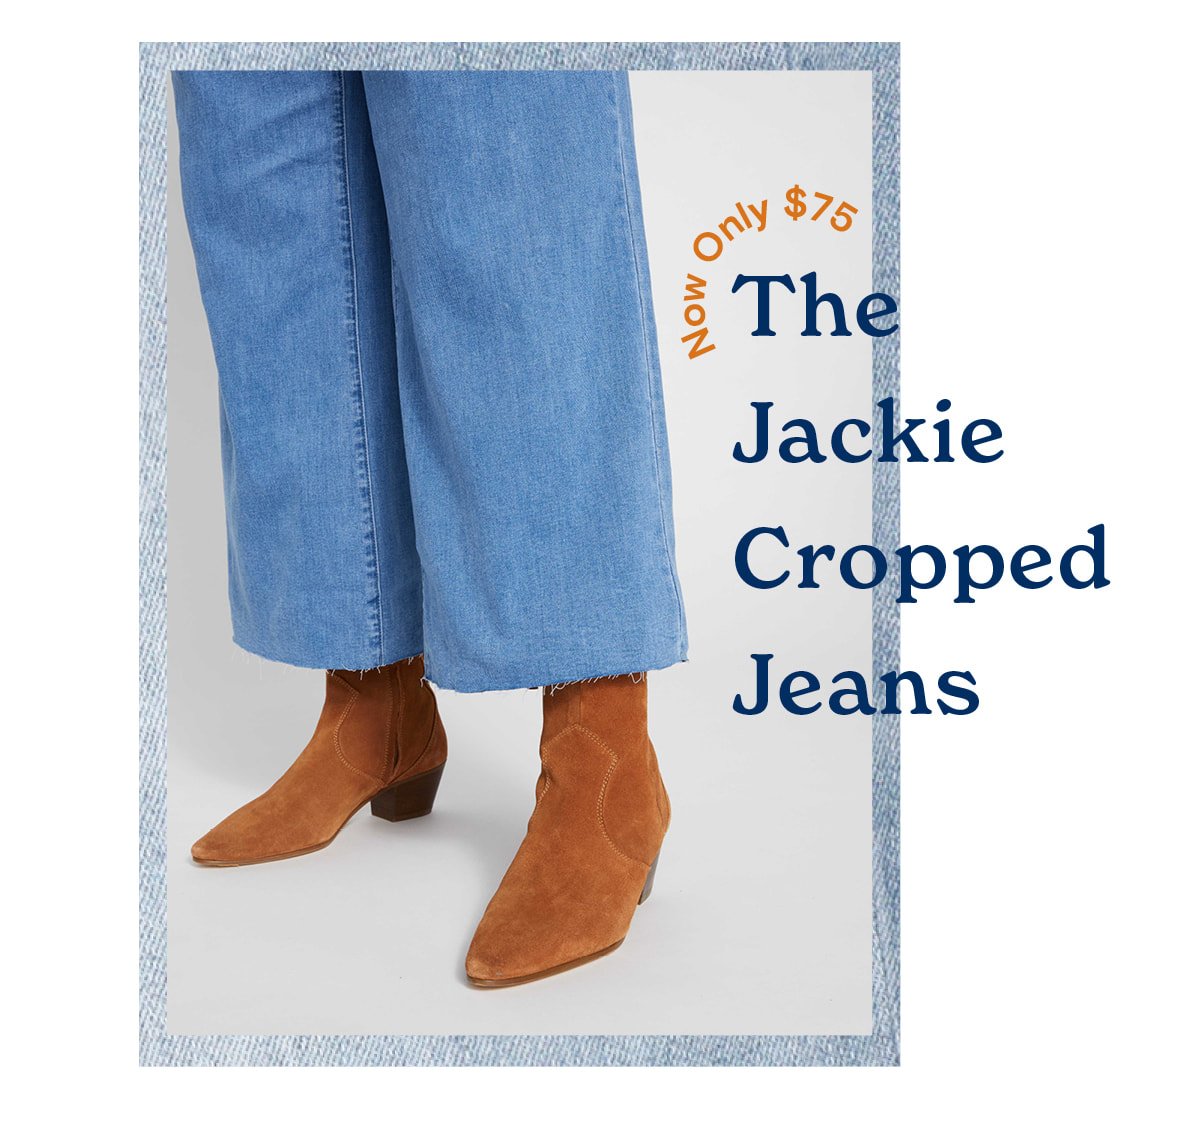 The Jackie Cropped Jeans are $75